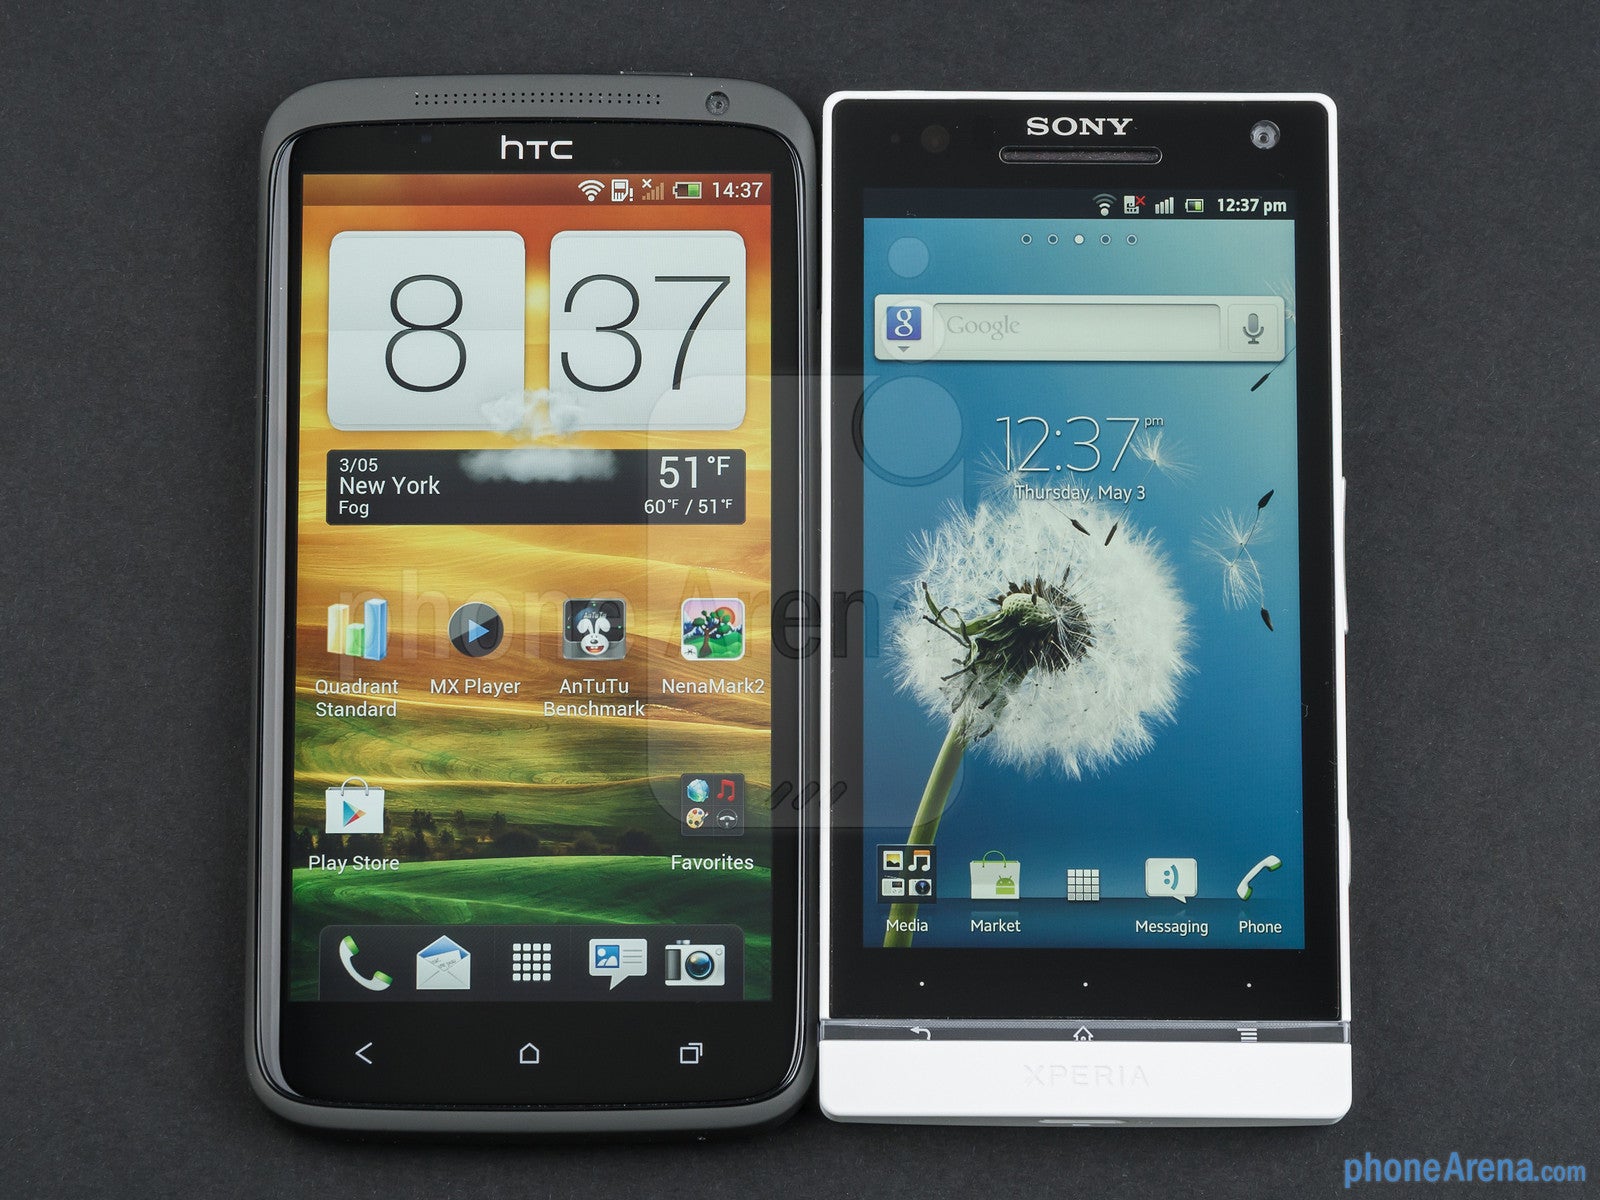 HTC One X (left) and Sony Xperia S (right) - HTC One X vs Sony Xperia S